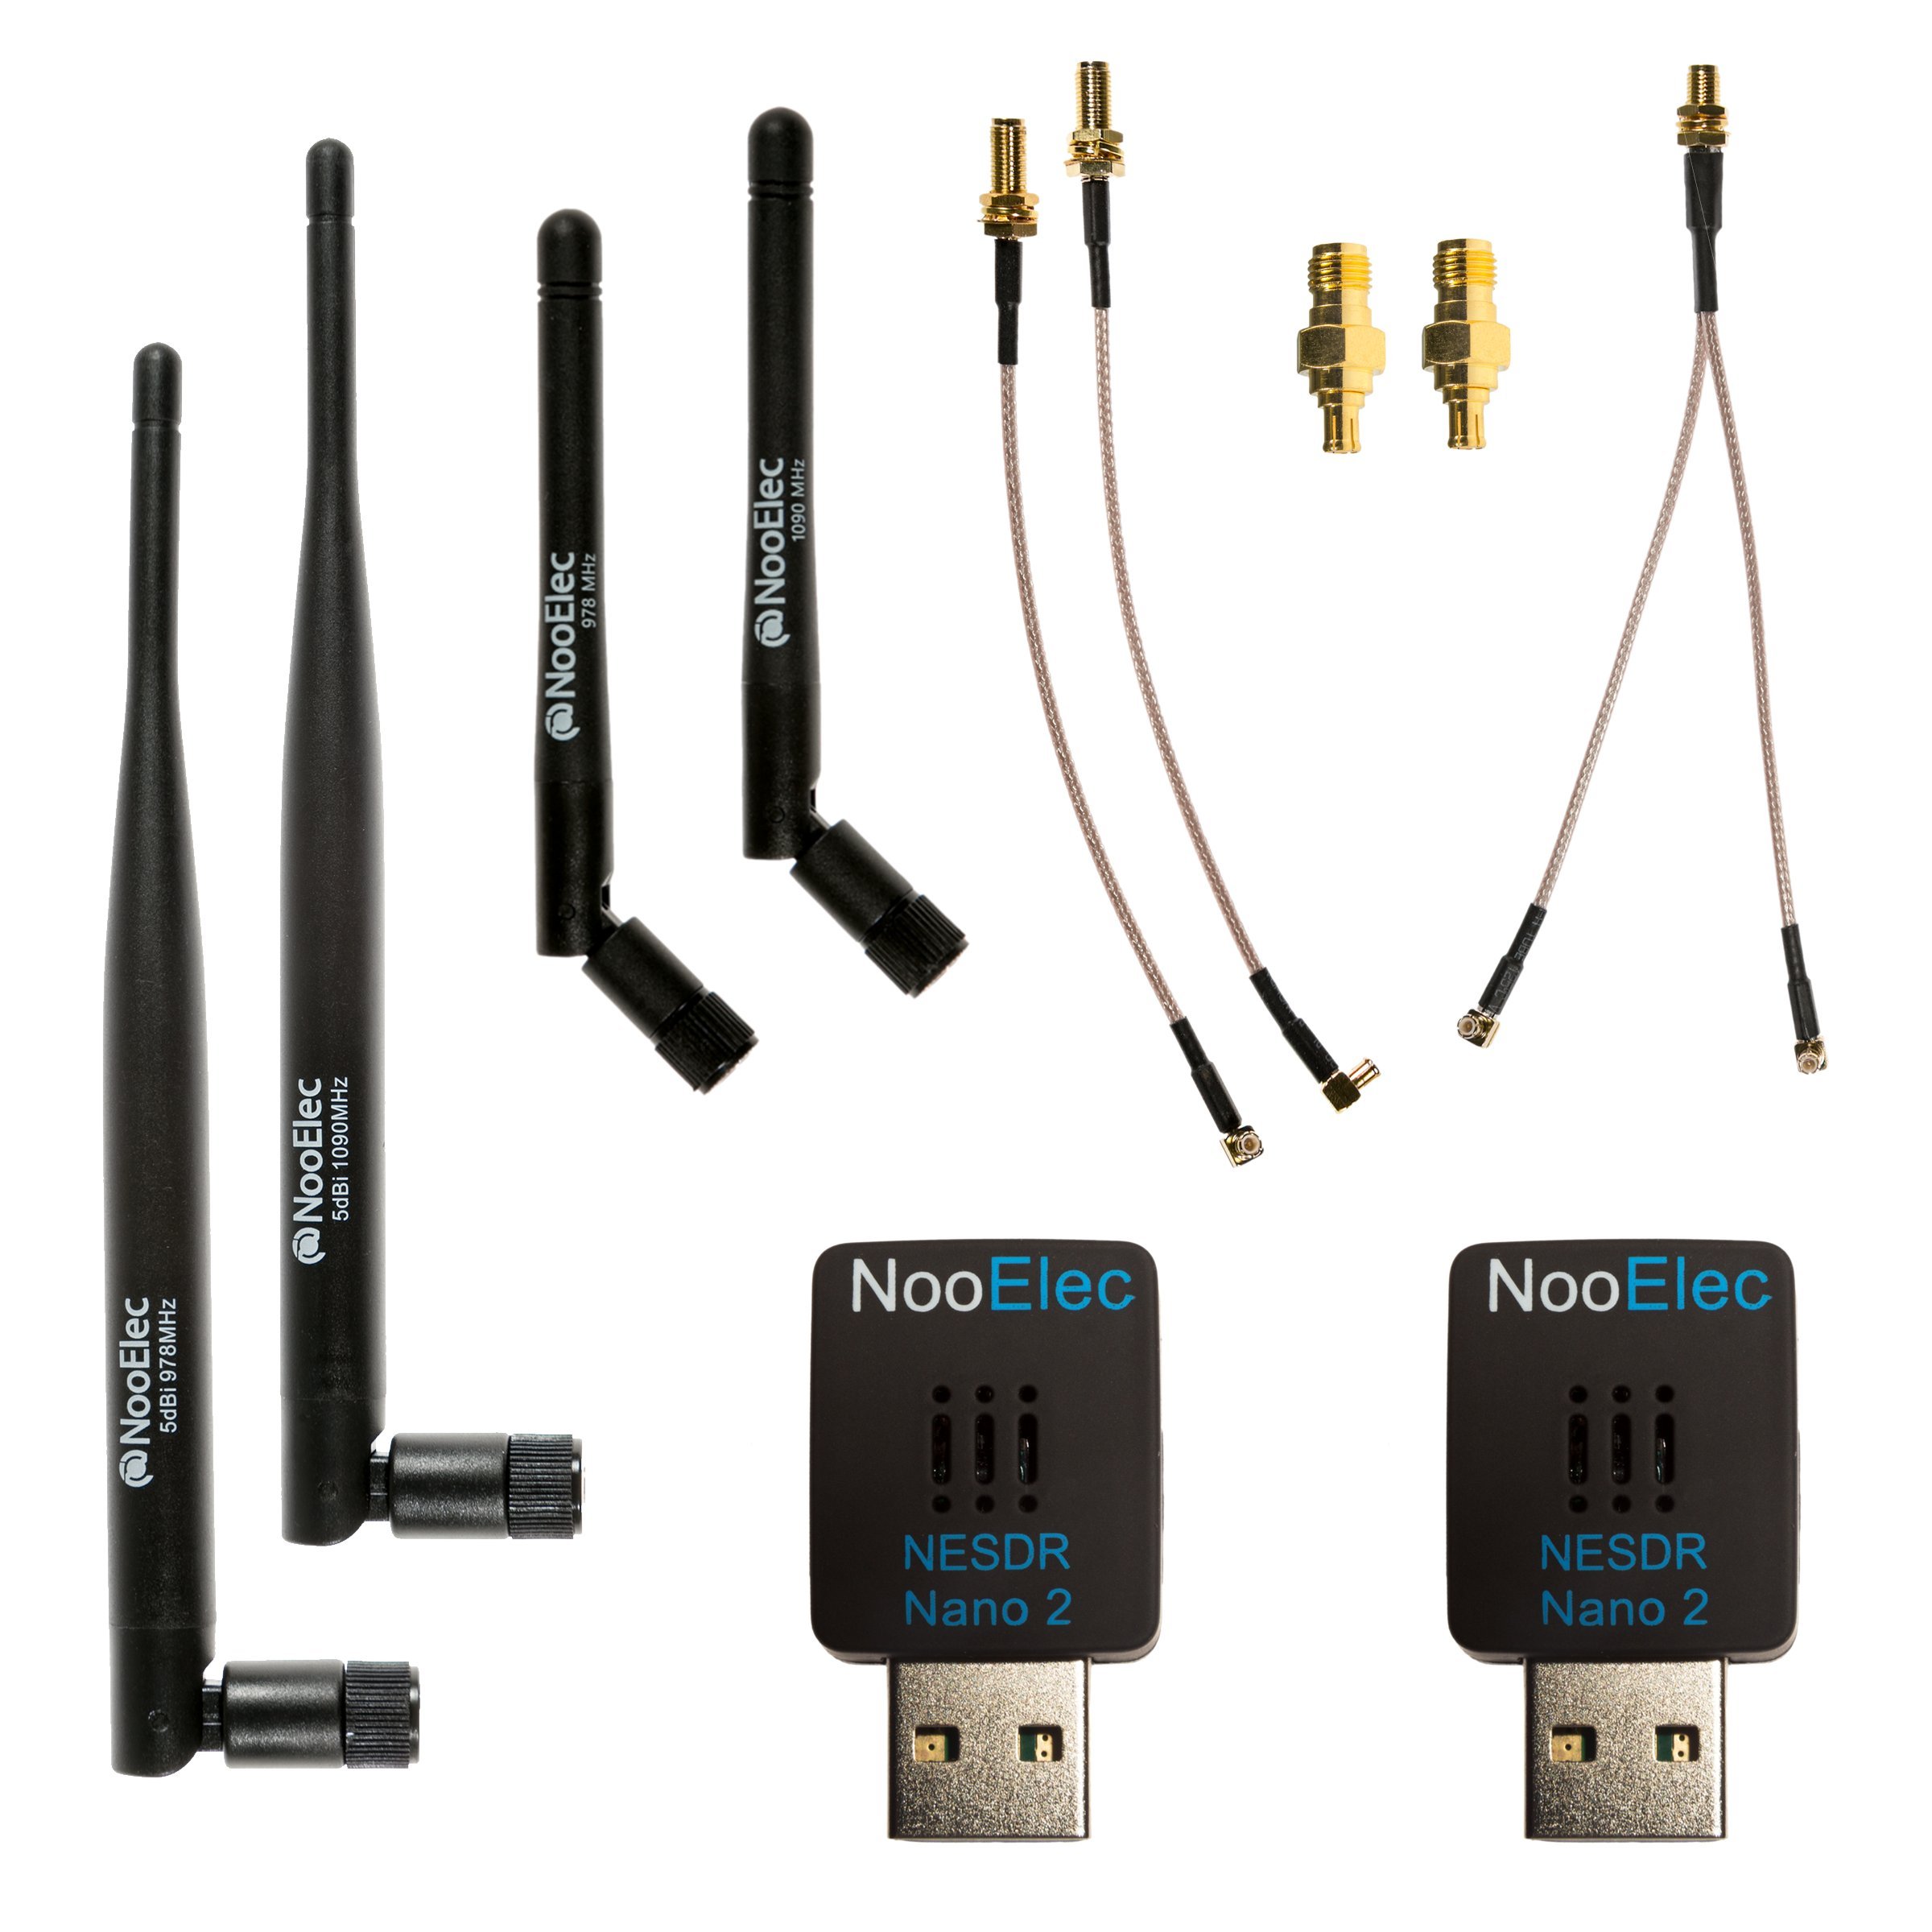 Book Cover Nooelec Dual-Band NESDR Nano 2 ADS-B (978MHz UAT & 1090MHz 1090ES) Bundle for Stratux™, Avare, Foreflight, FlightAware & Other ADS-B Software Applications. Includes 2 SDRs, 4 Antennas & 5 Adapters